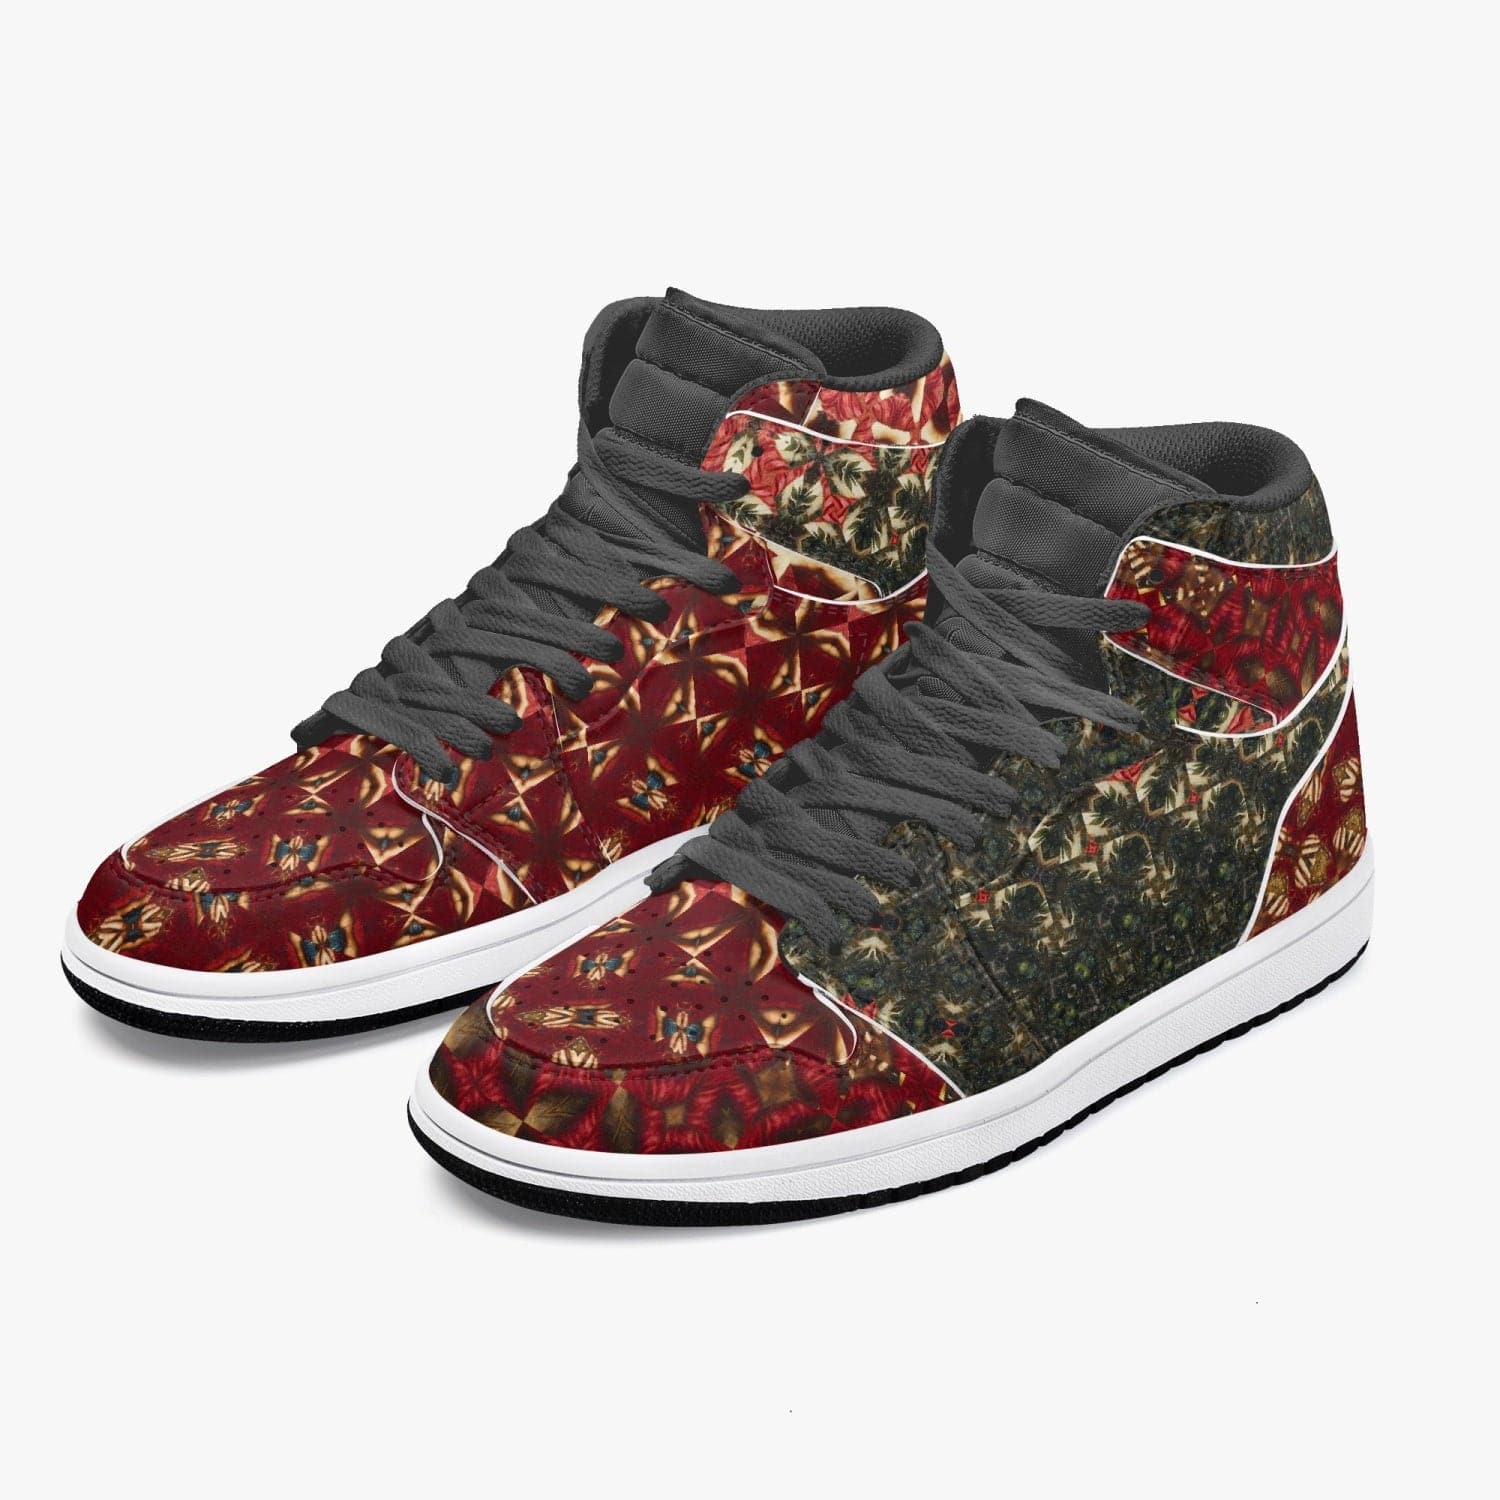 Red with yellow patterned Trendy design 2022 New Black High-Top Leather Sneakers, by Sensus Studio Design